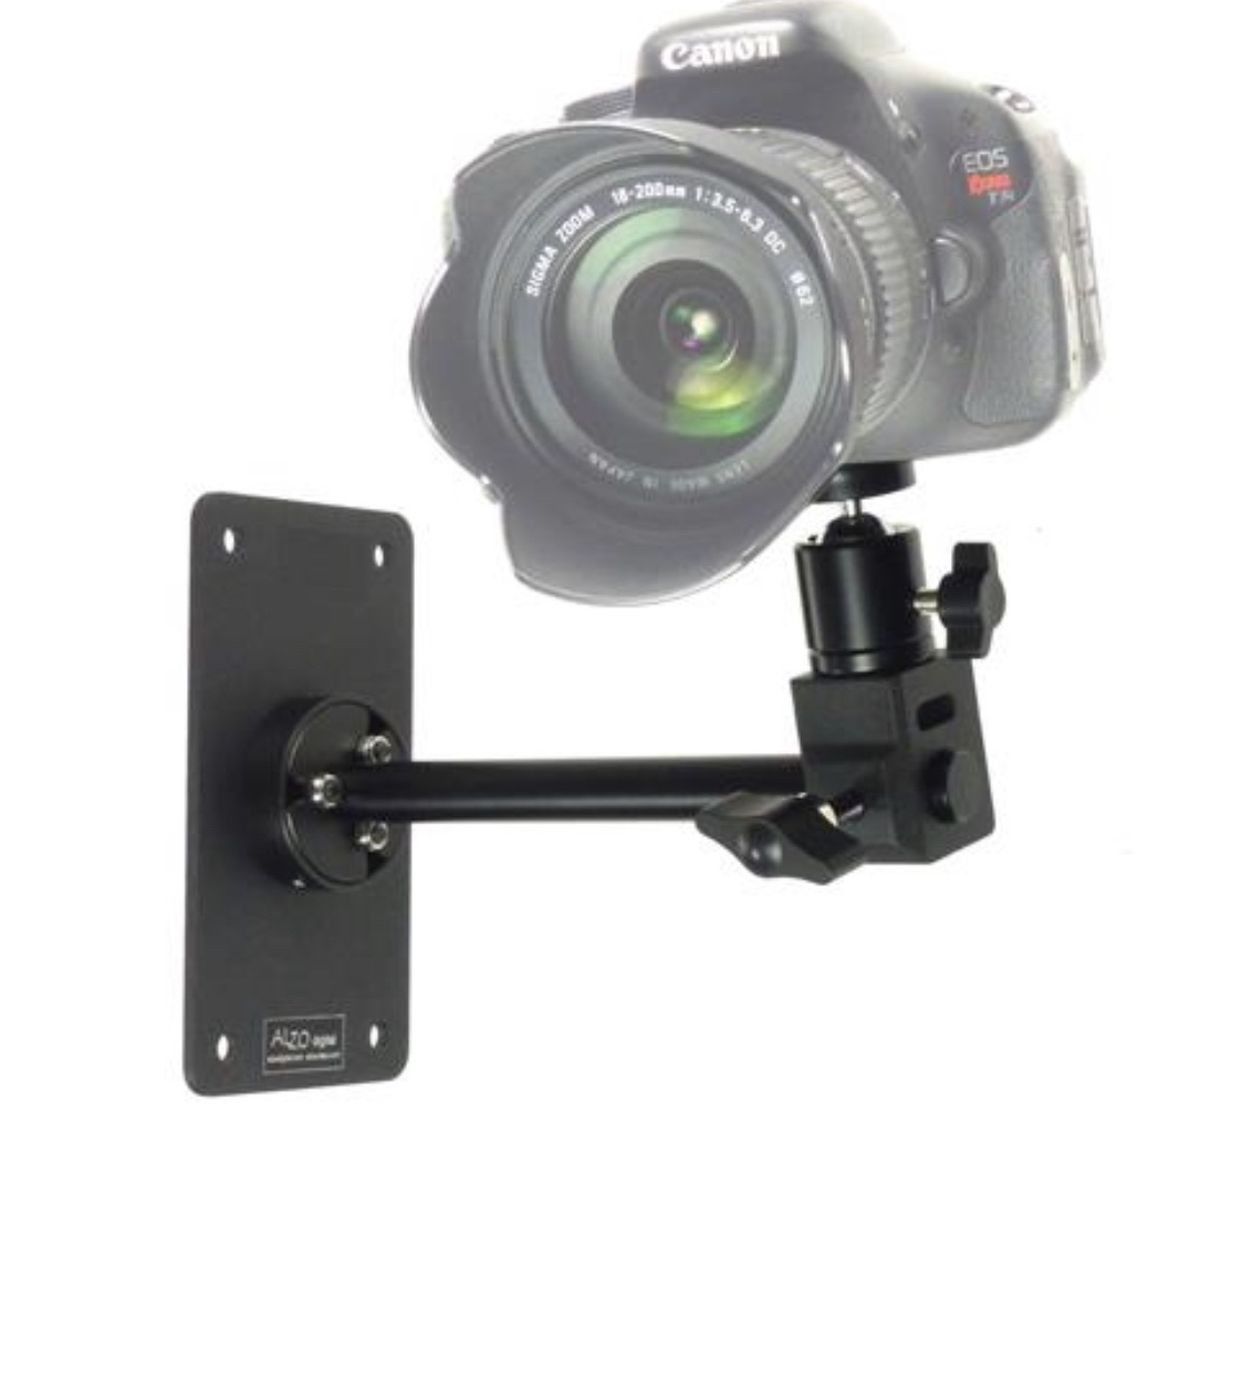 Alzo Digital Wall Mount with Ball Head for Camera, 6lbs Capacity, This sturdy all metal wall camera mount is designed to be installed on a flush wall